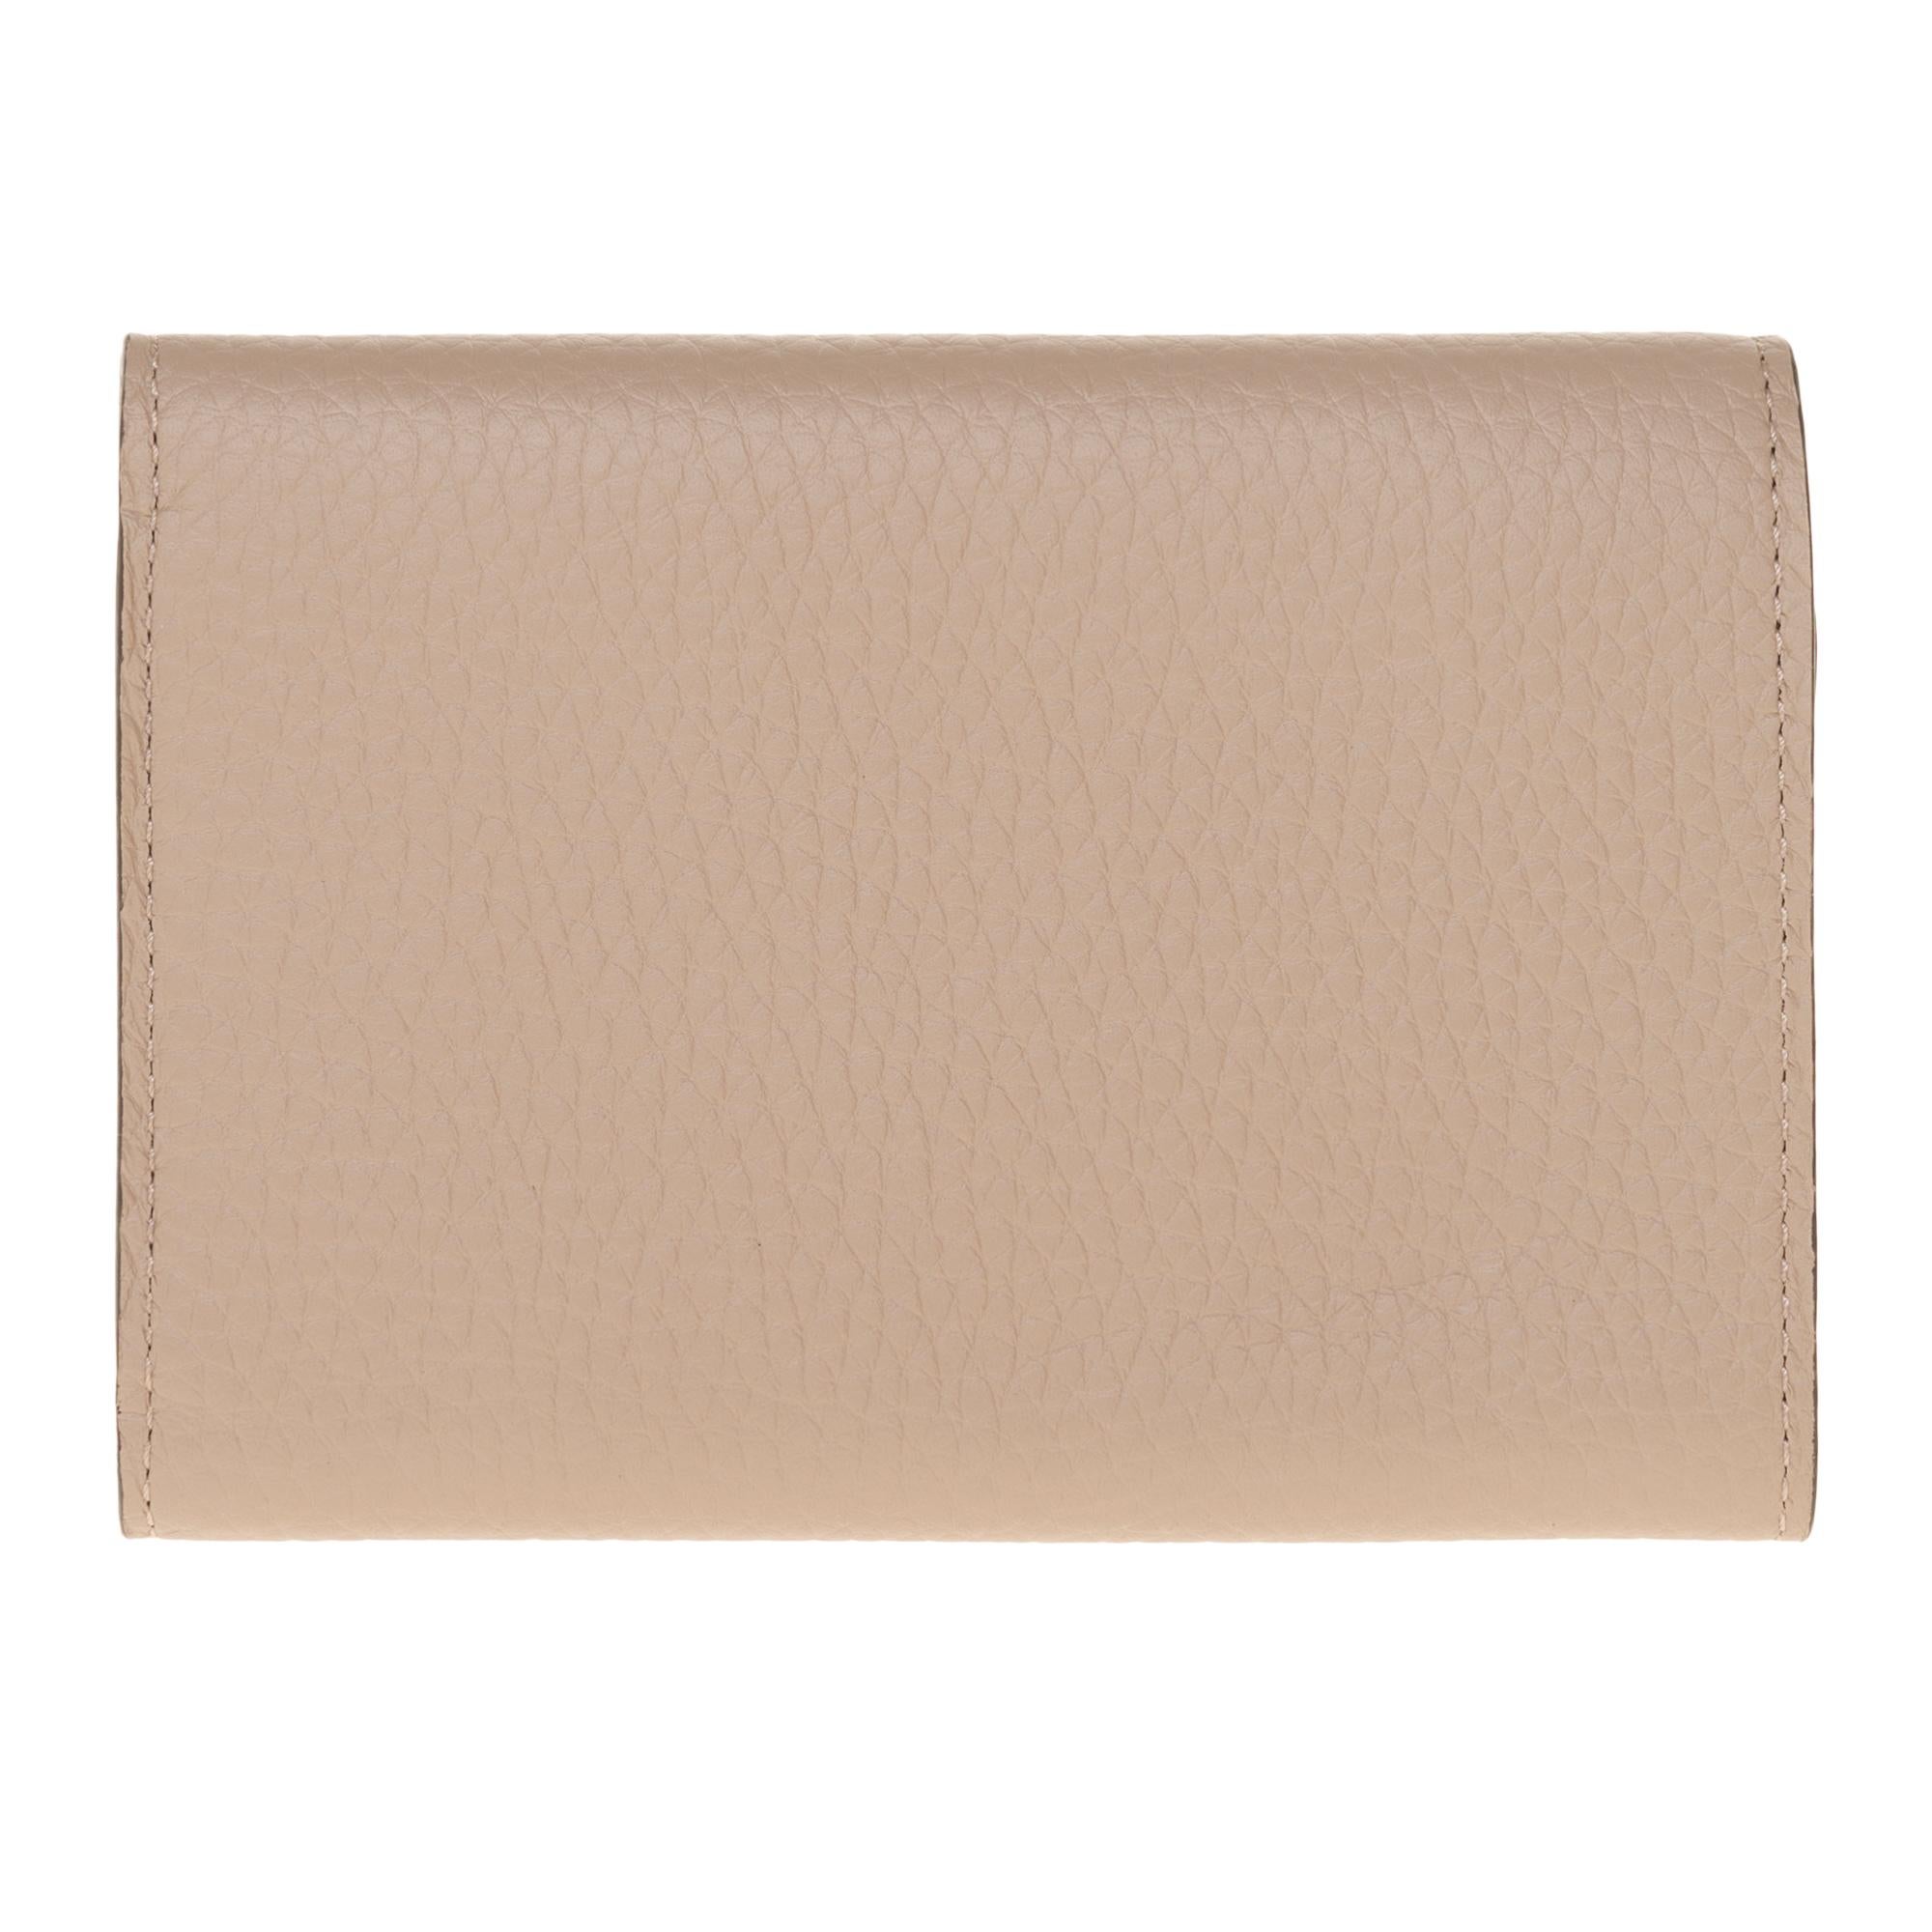 The Capucines Compact wallet in soft Taurillon leather is very practical. Its generous size is ideal for carrying the essentials of everyday life. This elegant version is both well designed and original. With two flaps, it can accommodate credit